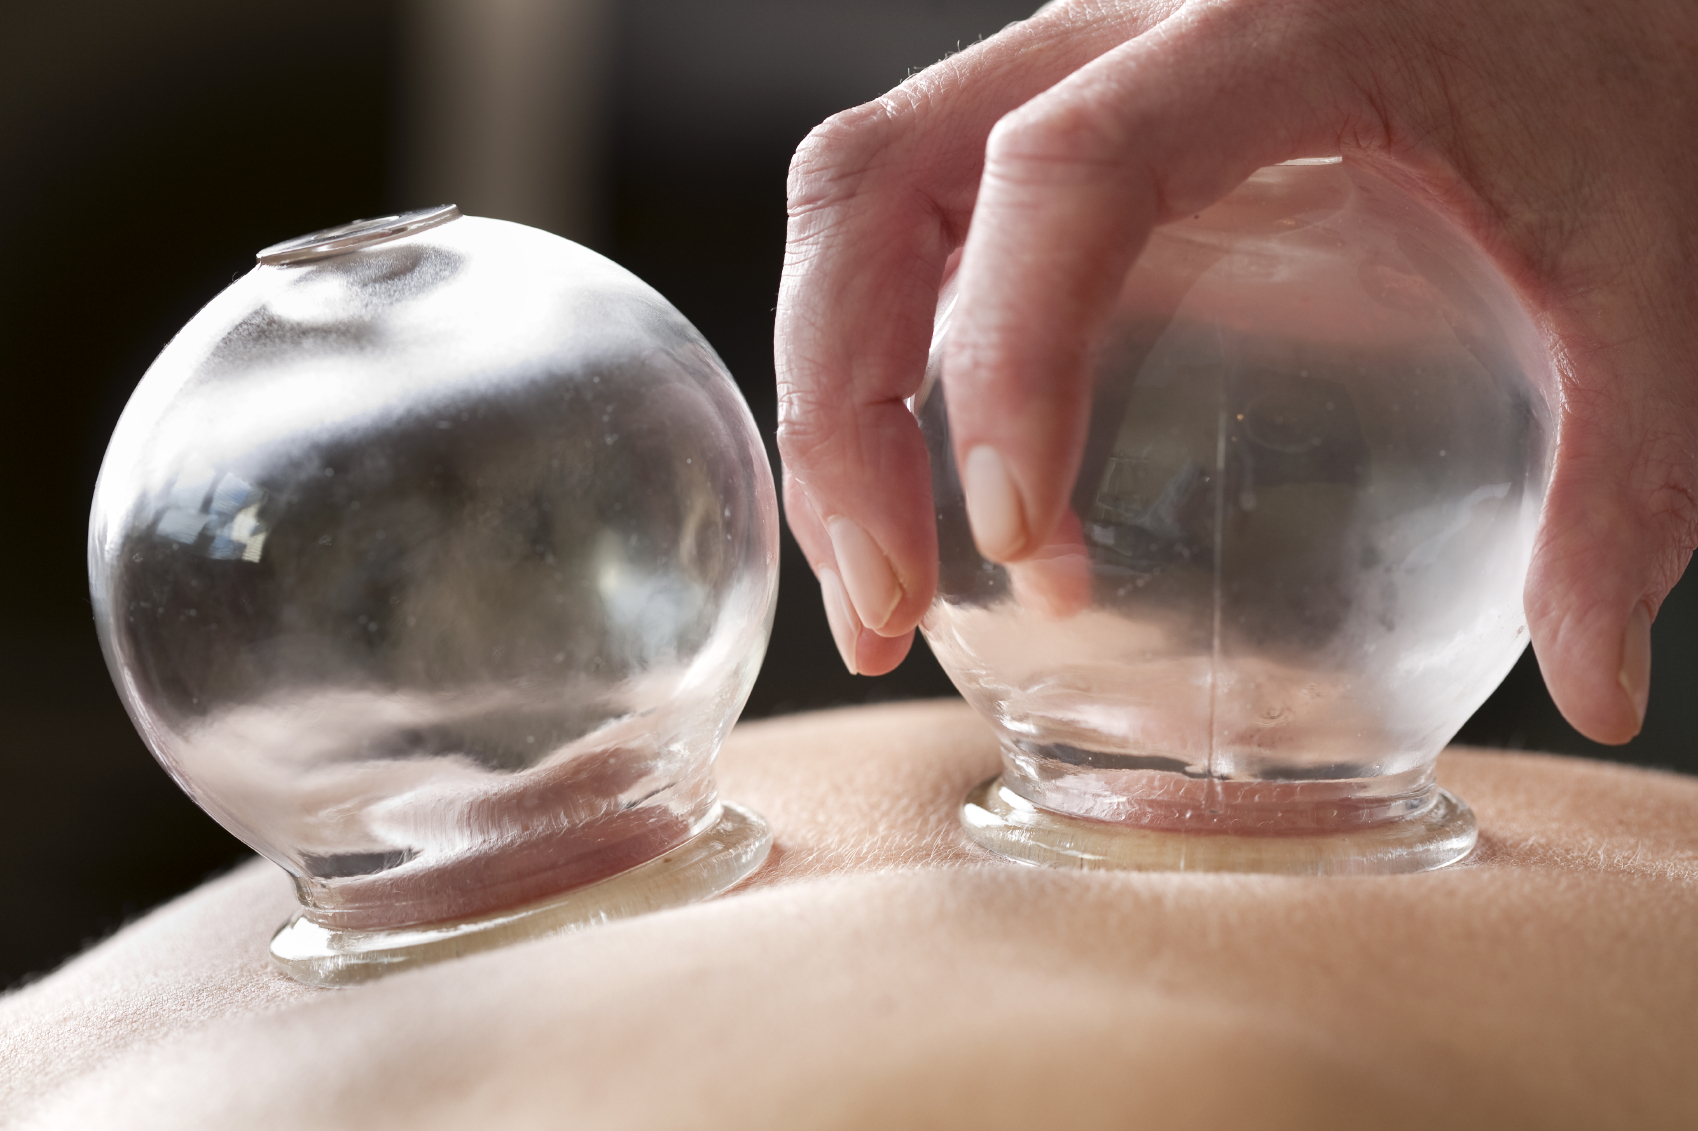 Going full circle: all about cupping